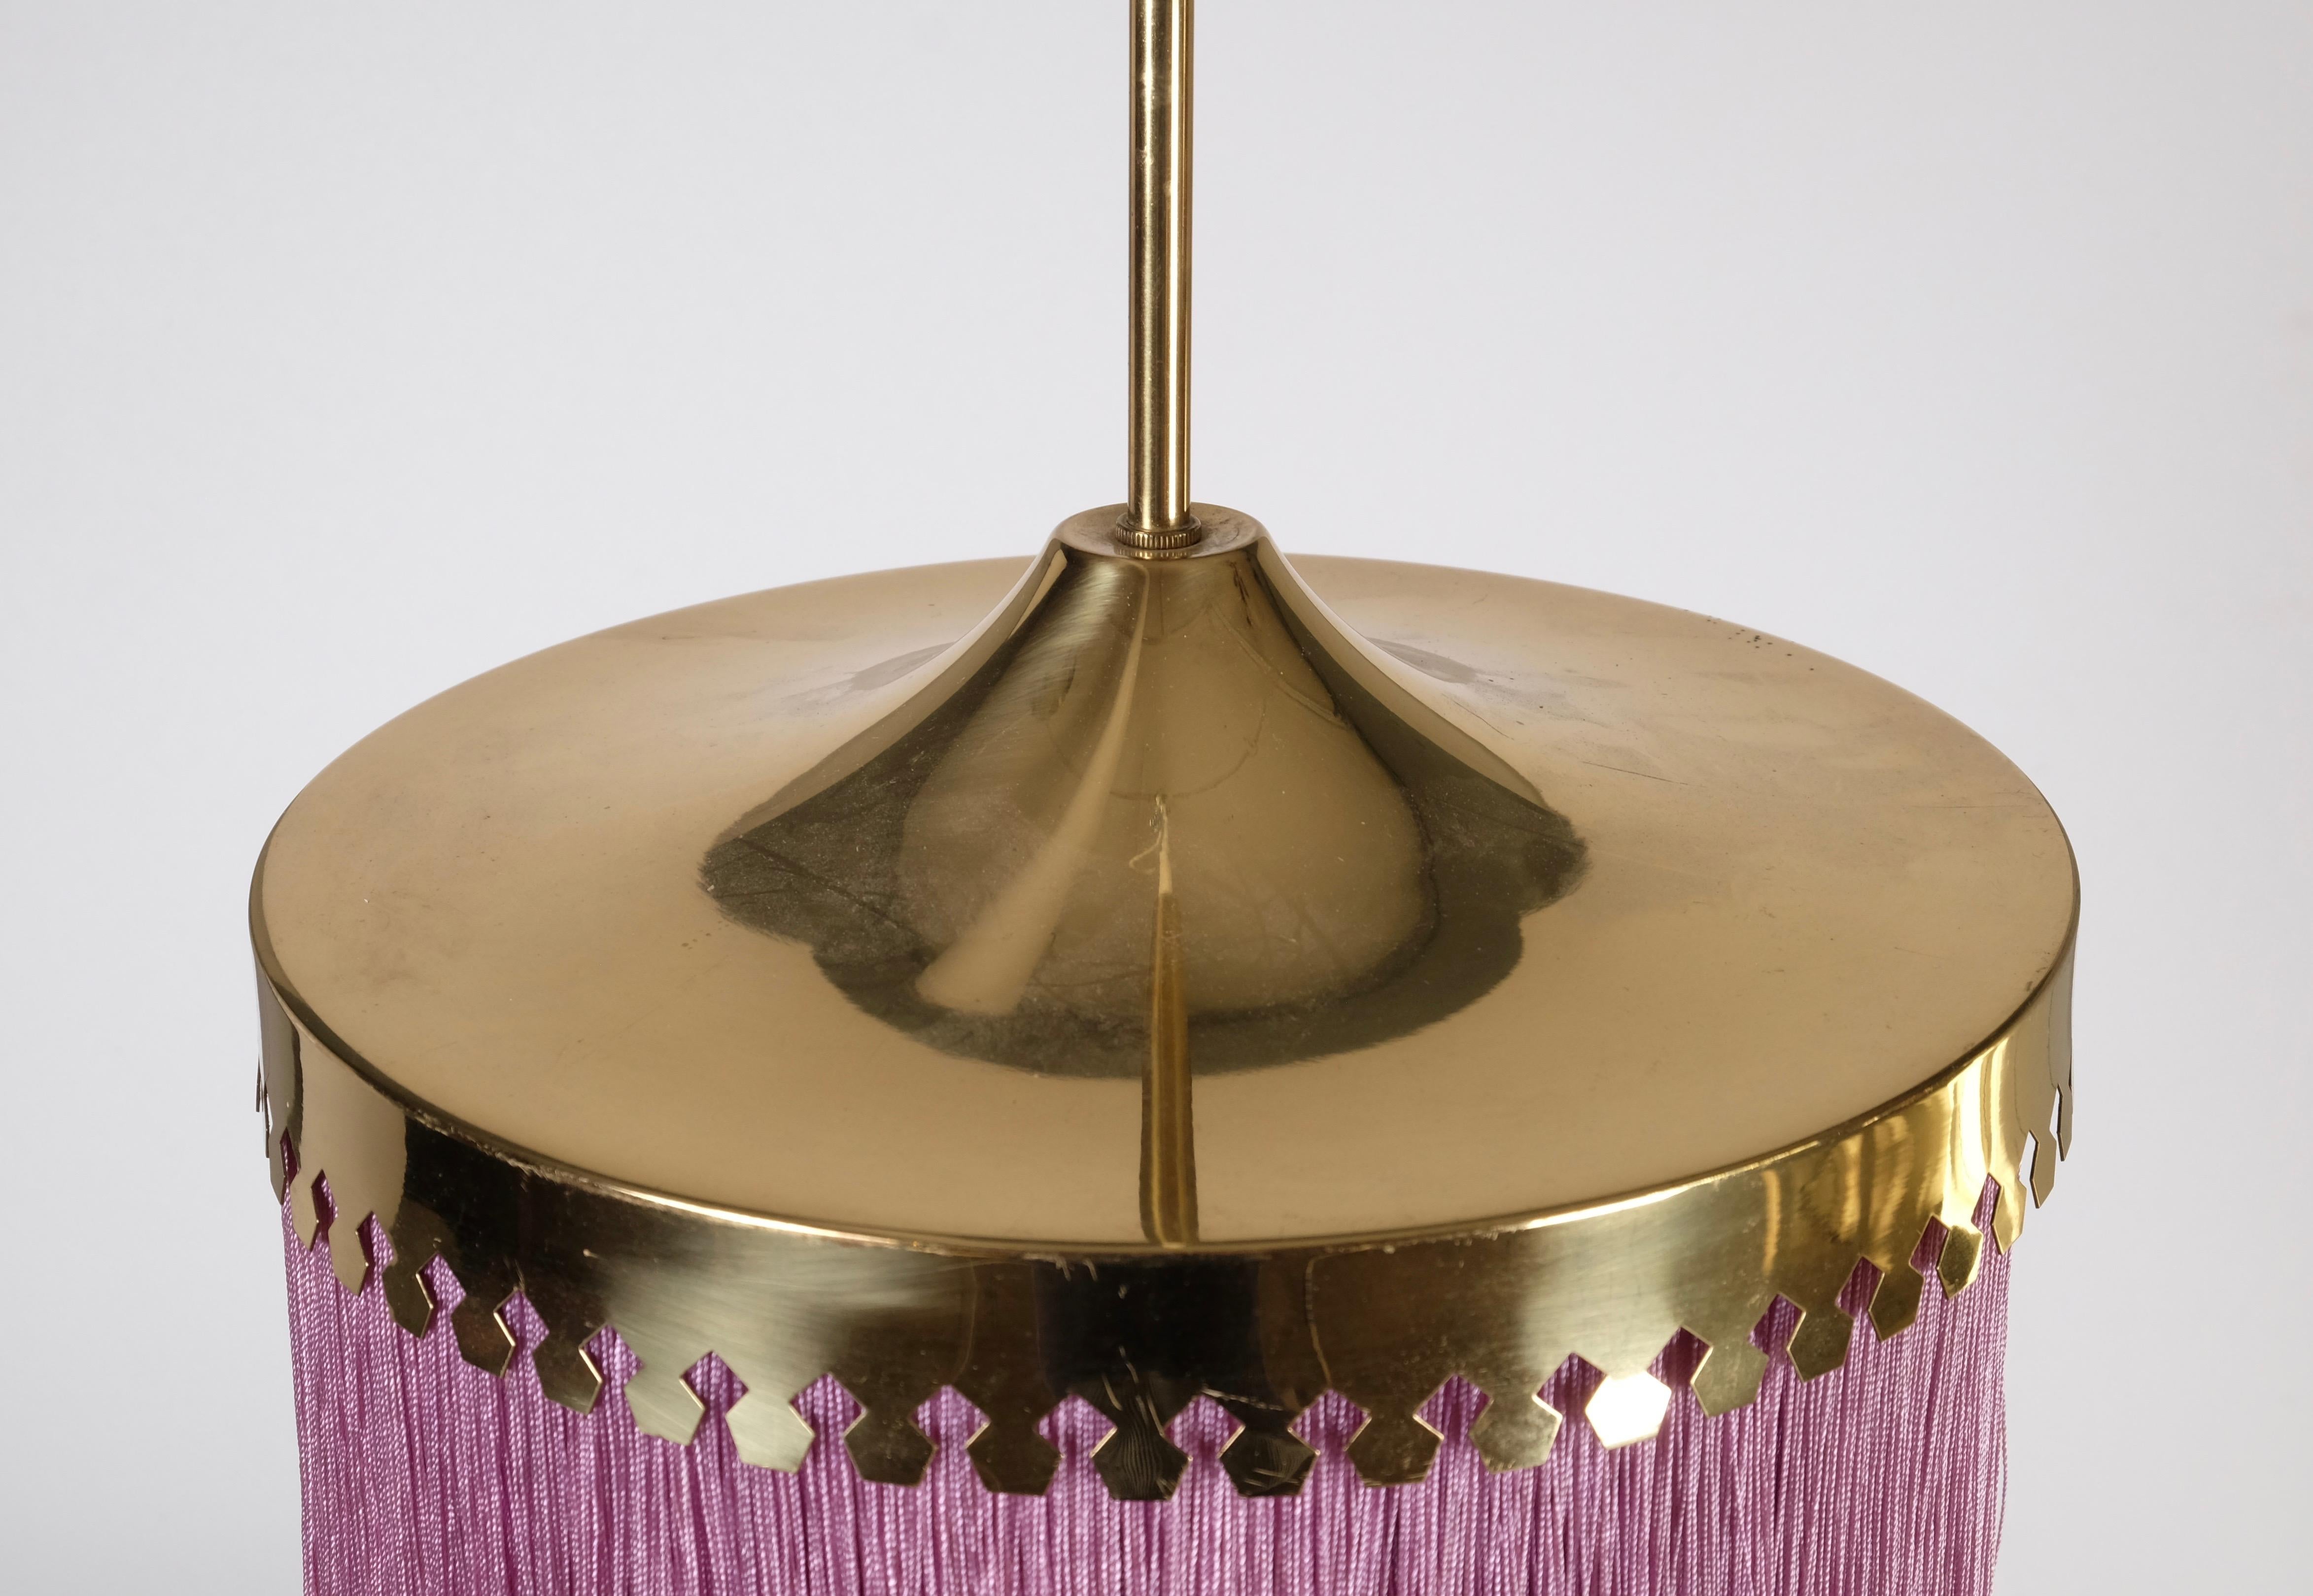 Brass and purple silk fringes. Produced by Hans-Agne Jakobsson, Markaryd, Sweden, 1960s.
Measure: Diameter 28 cm. Height is adjustable.